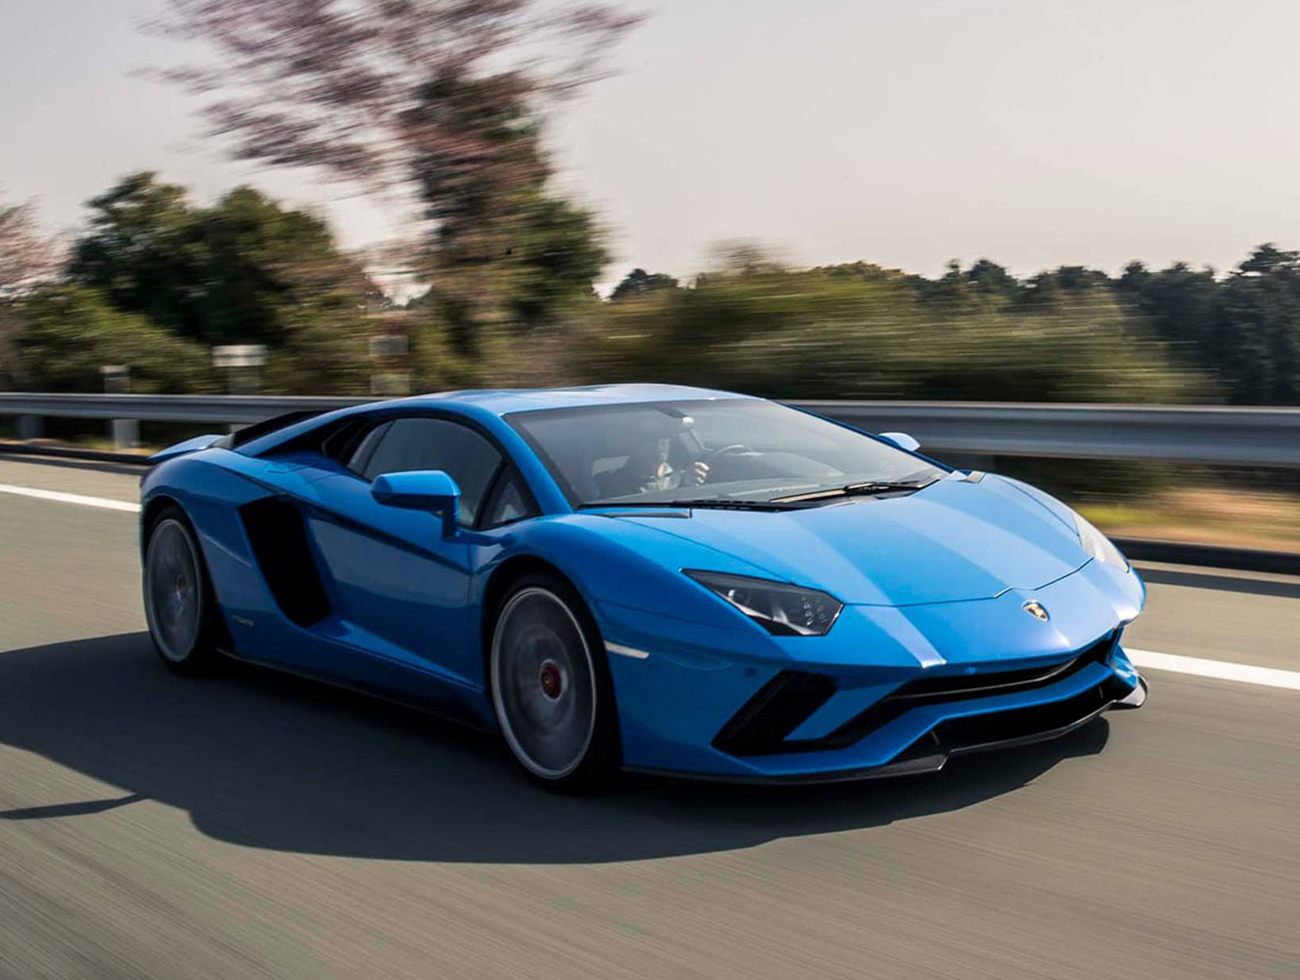 10 years of Lamborghini Aventador, and the innovations that made it